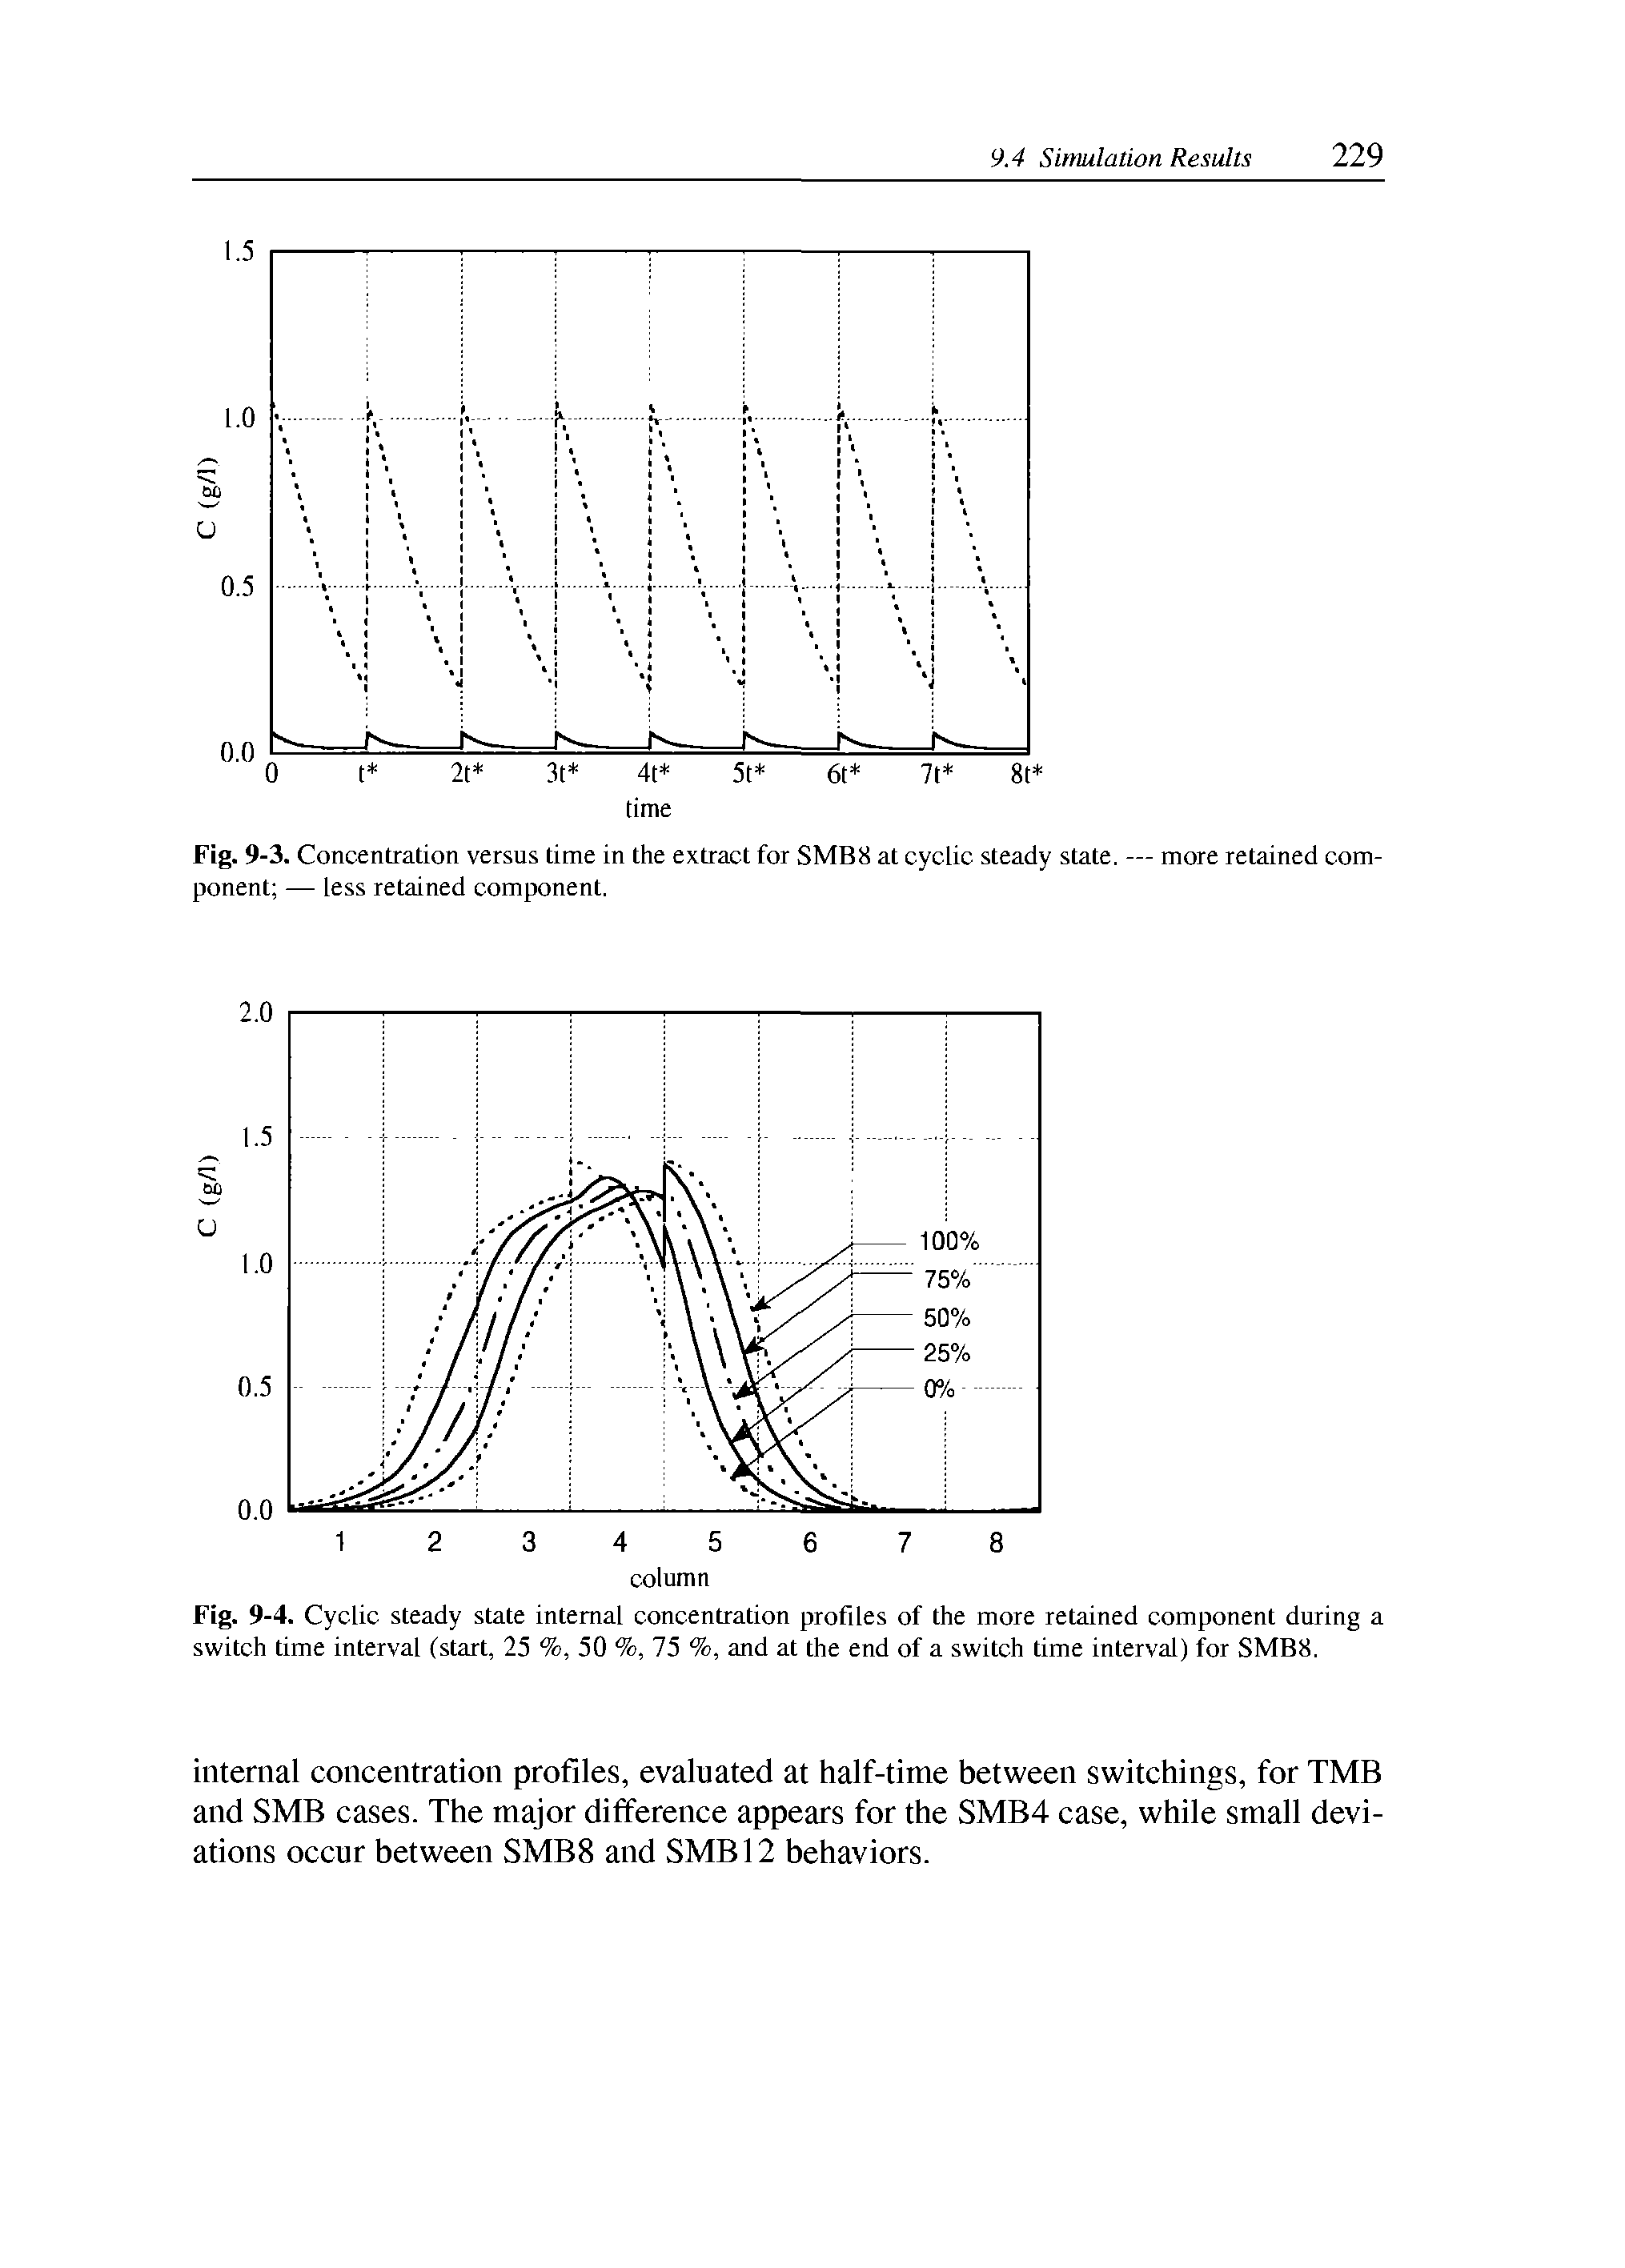 Fig. 9-3. Concentration versus time in the extract for SMBS at cyclic steady state. — more retained component — less retained component.